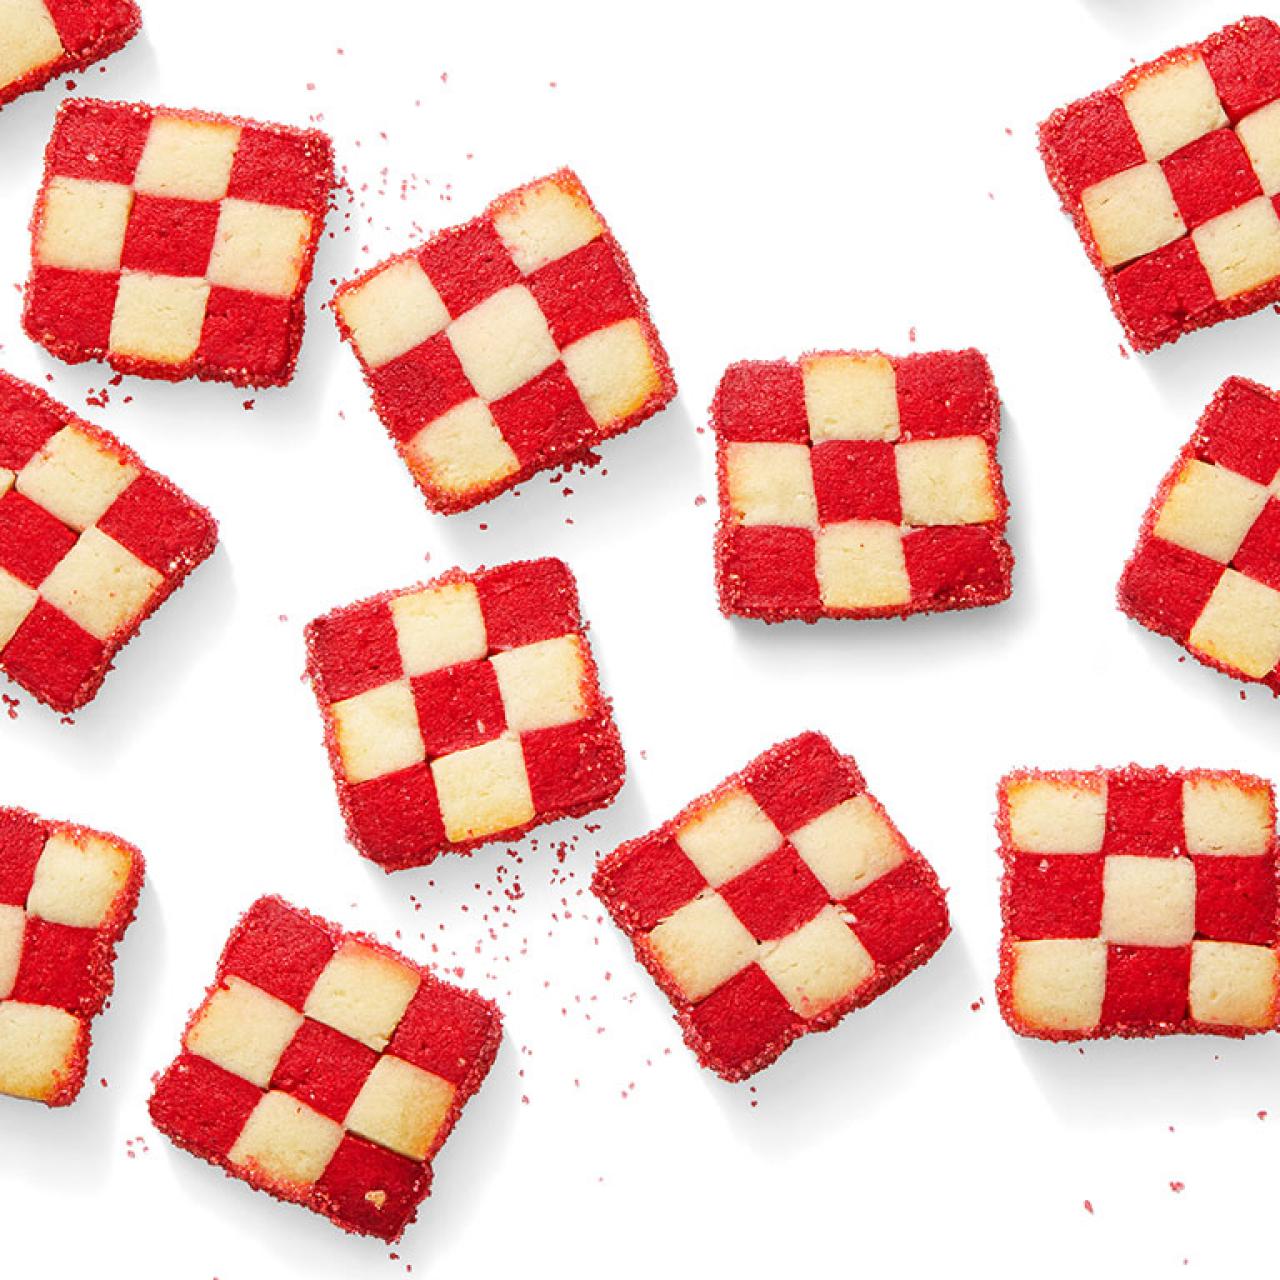 https://food.fnr.sndimg.com/content/dam/images/food/fullset/2021/11/04/0/FNM_120121-Red-and-White-Checkerboard-Cookies_s4x3.jpg.rend.hgtvcom.1280.1280.suffix/1636035350903.jpeg